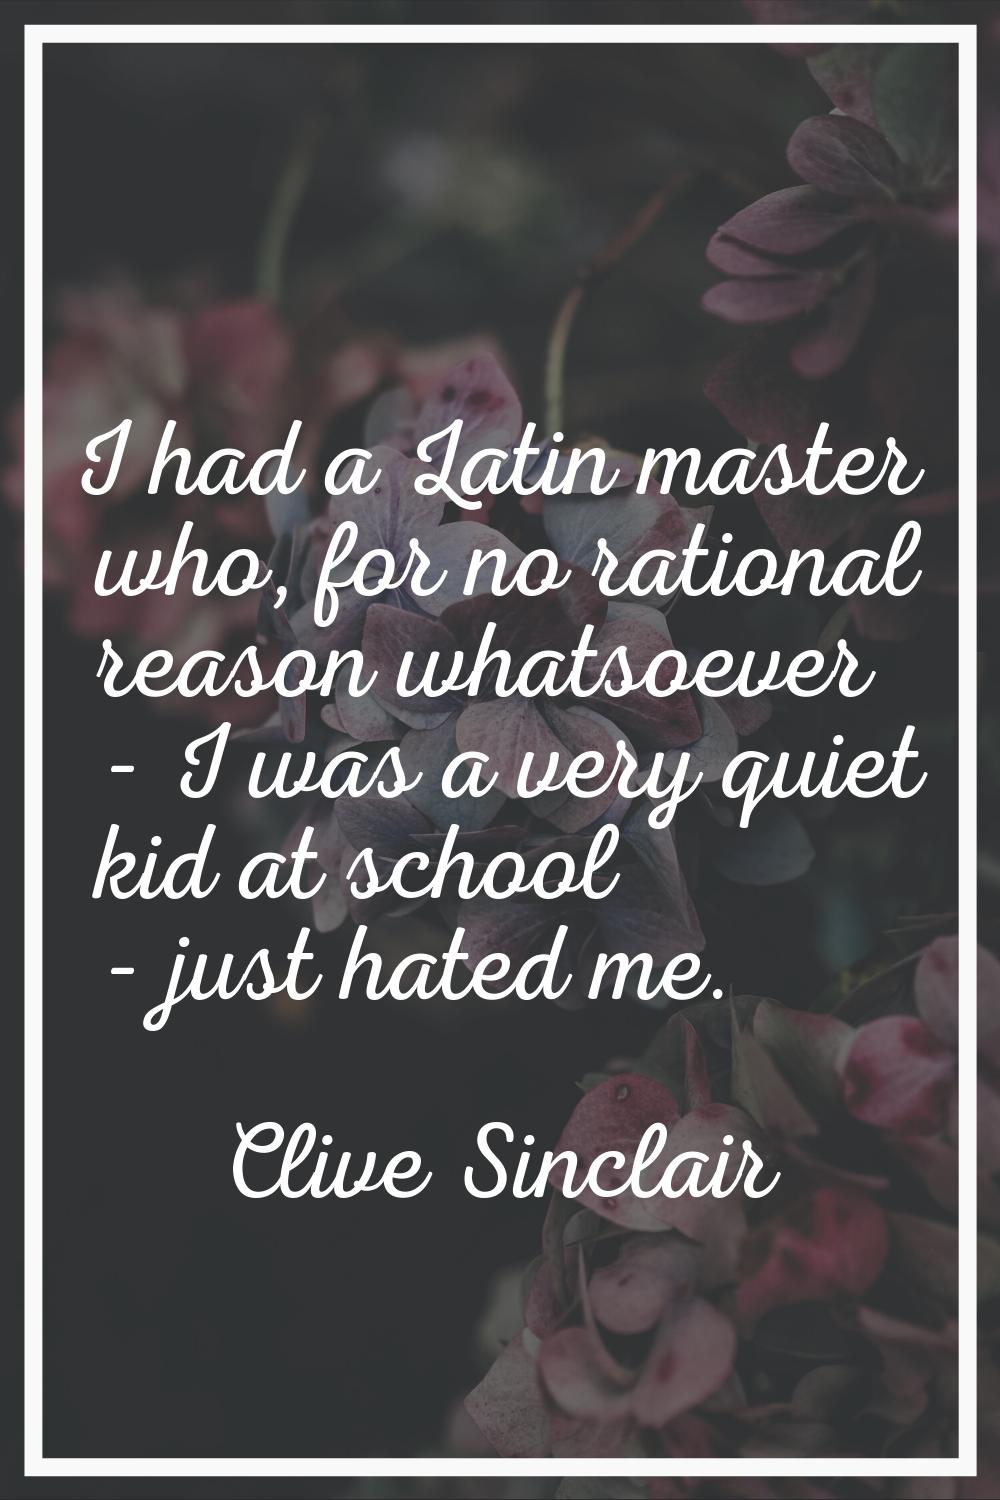 I had a Latin master who, for no rational reason whatsoever - I was a very quiet kid at school - ju